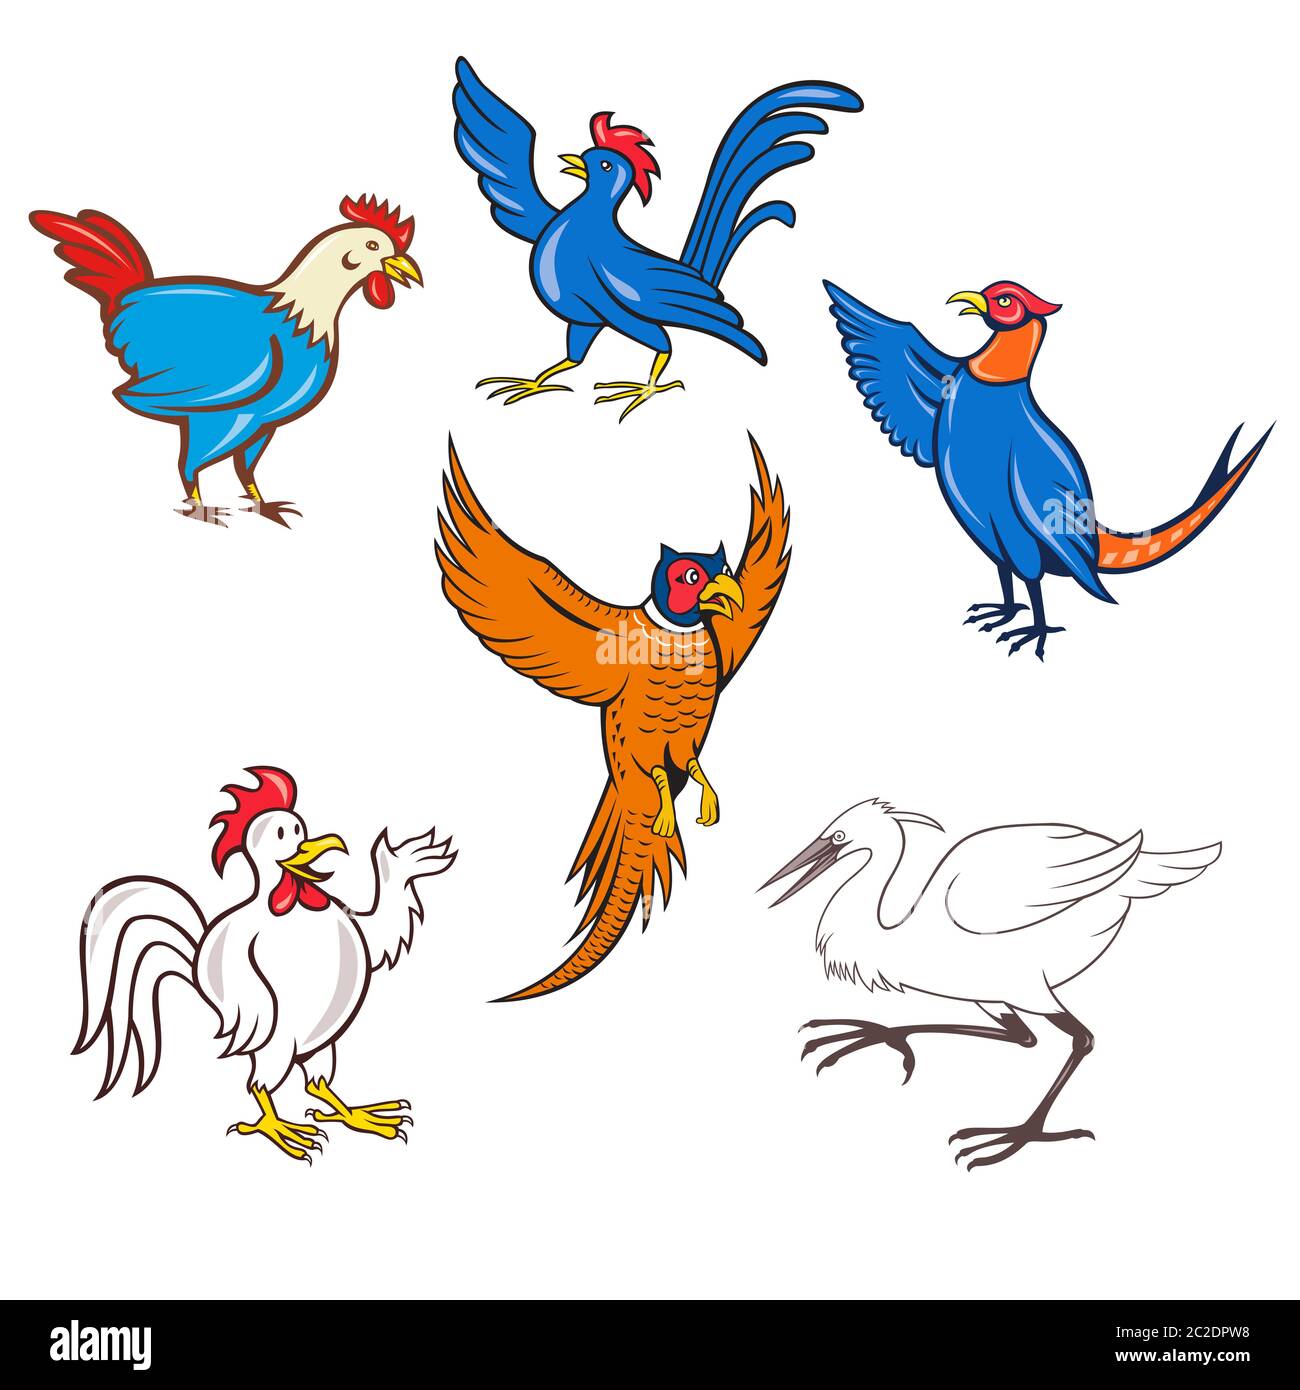 Set or collection of cartoon character mascot style illustration of fowl or bird such as chicken, cockerel, rooster, pheasant, crane or heron on isola Stock Photo